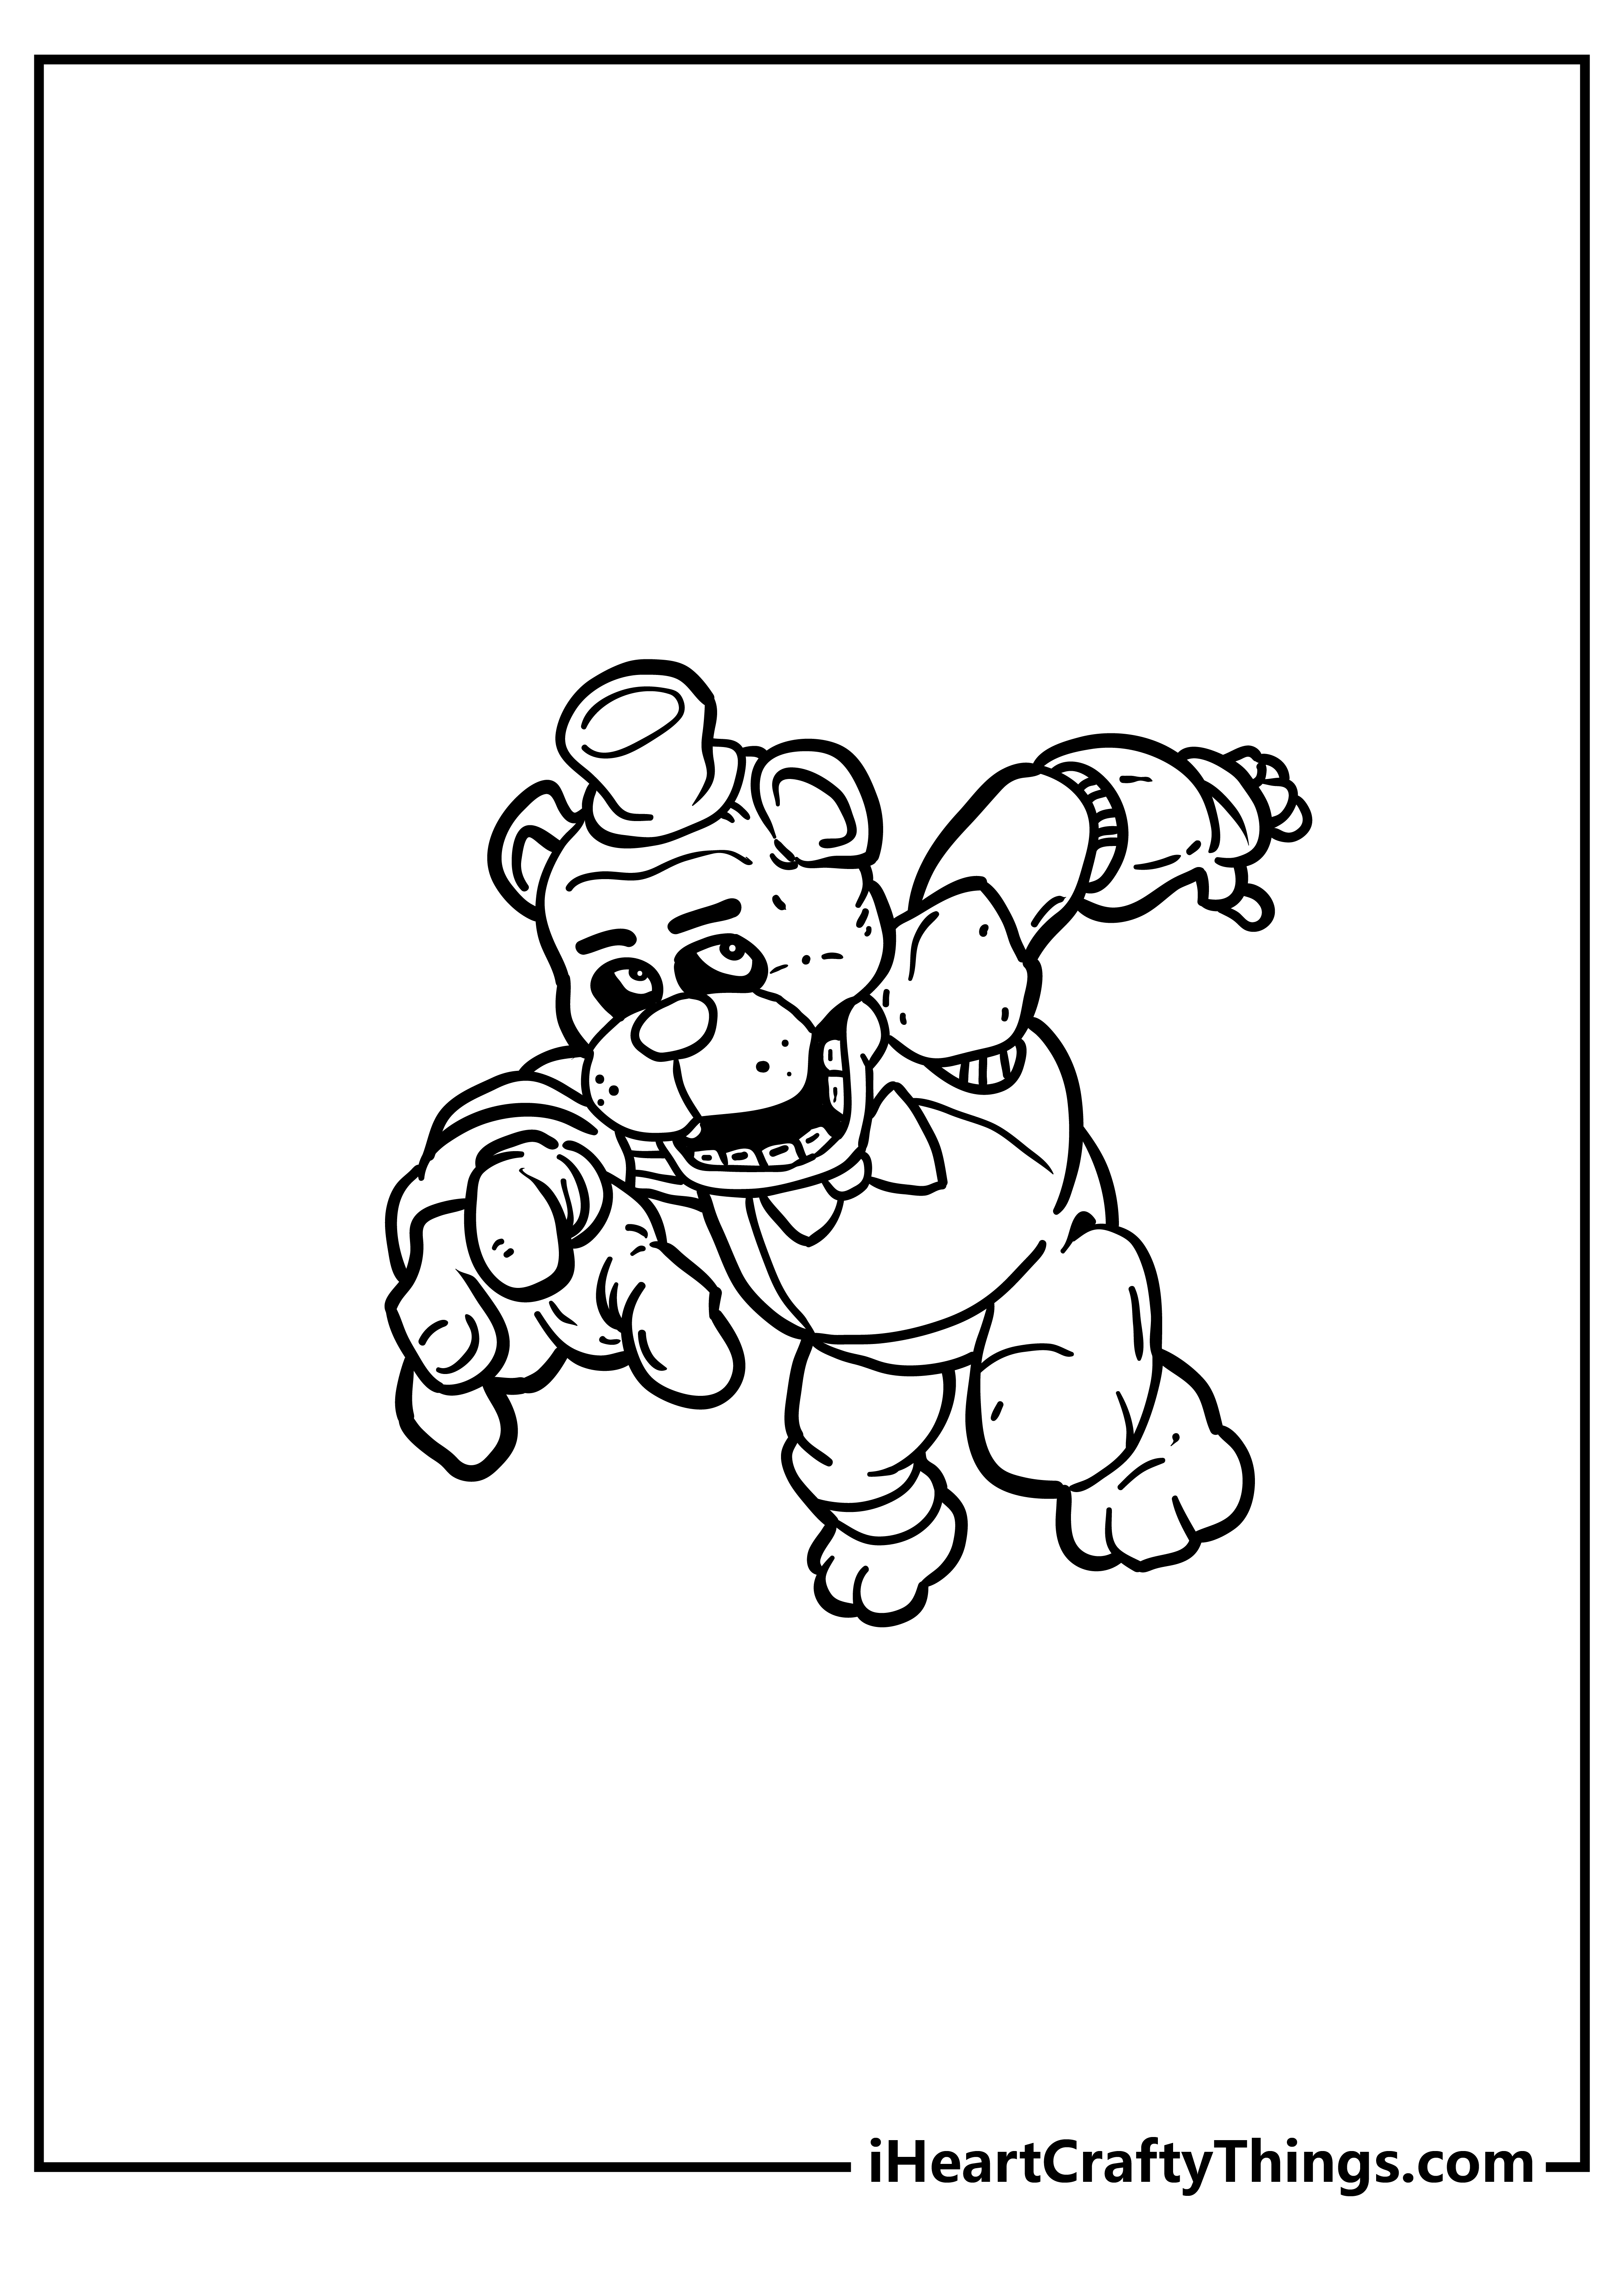 Five Nights At Freddy’s Coloring Pages free pdf download